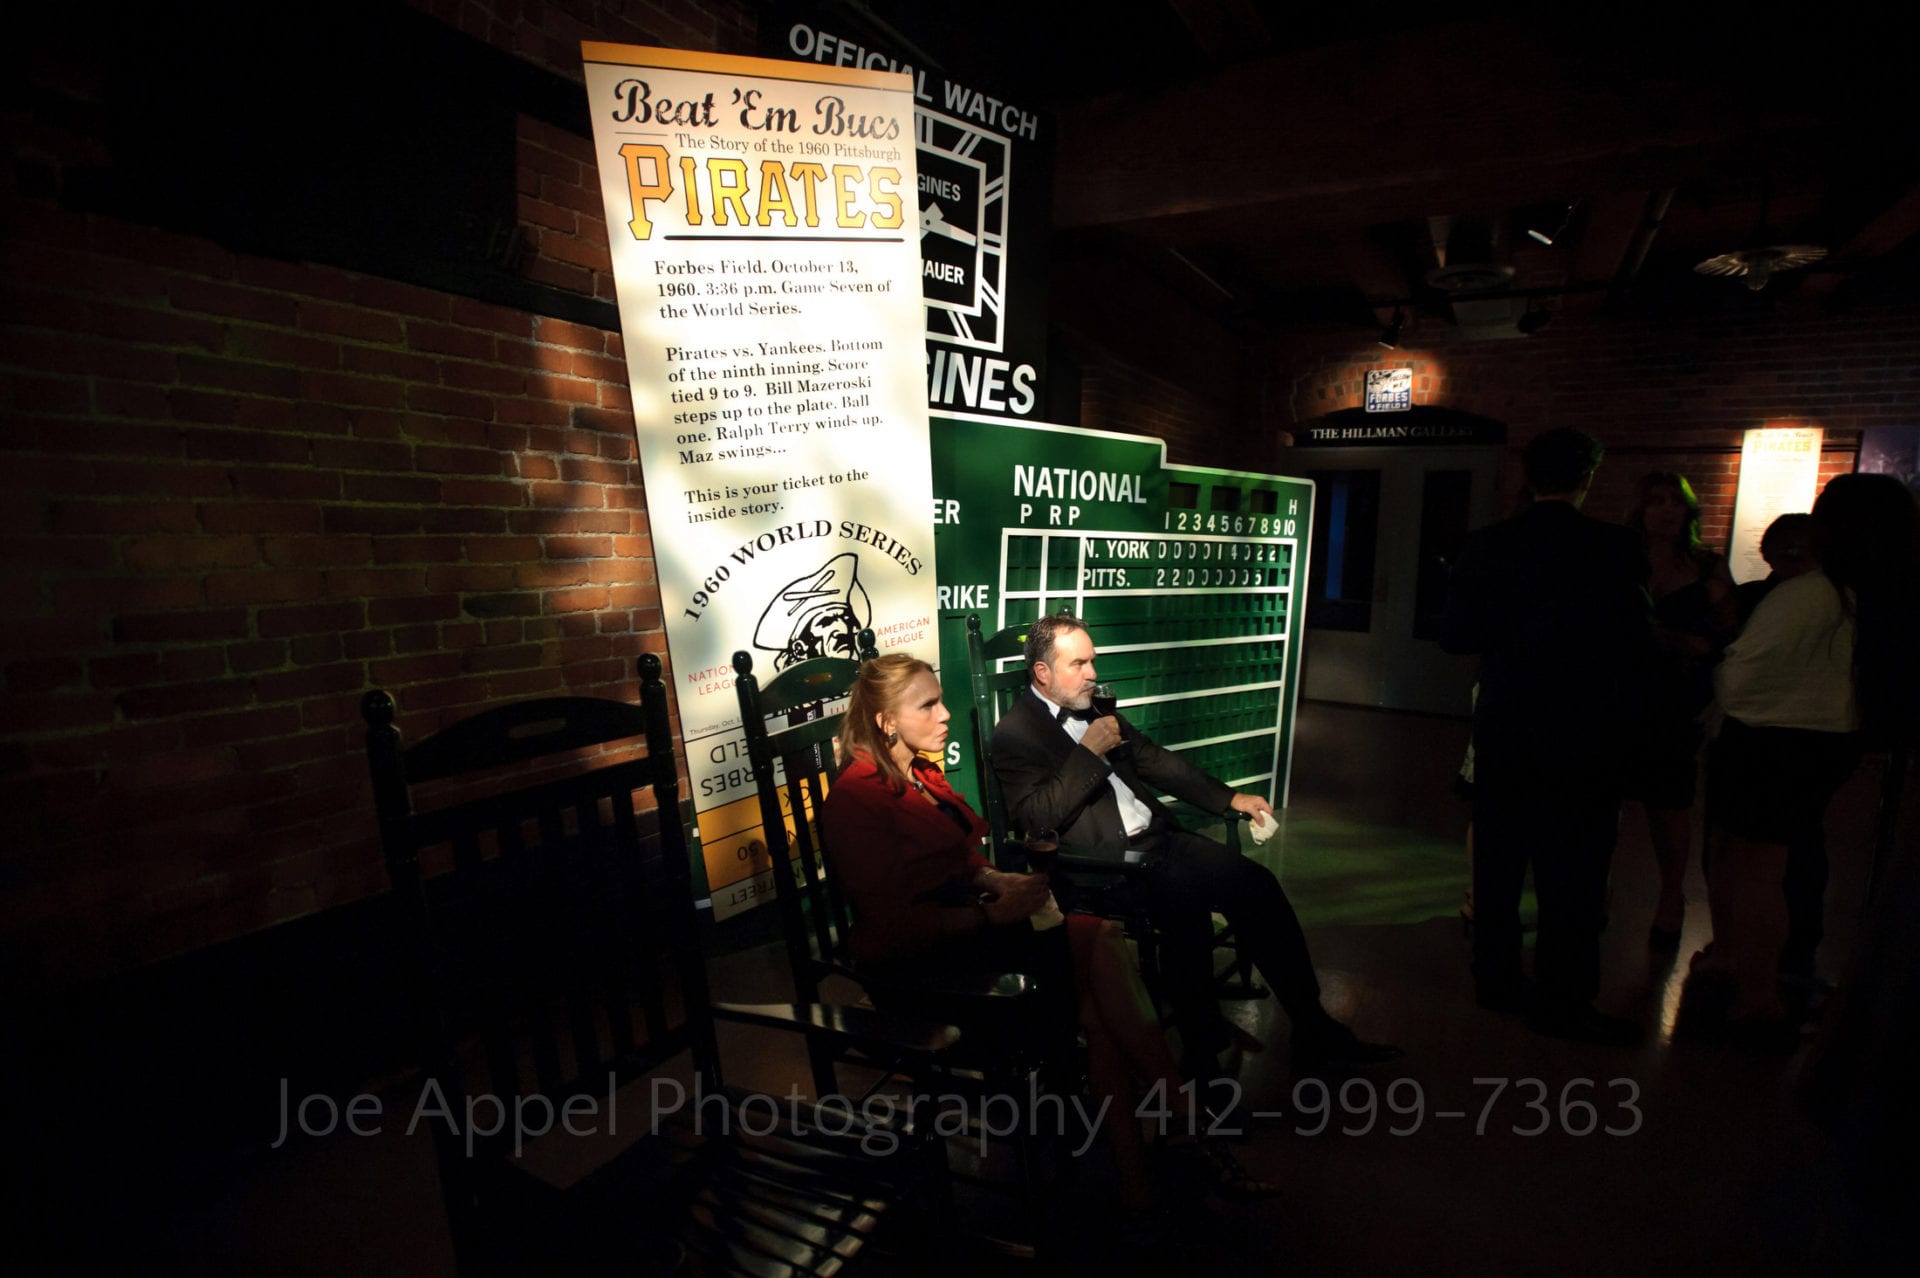 Couple sits in rocking chairs and drinks wine beneath an exhibit on the 1960 world series